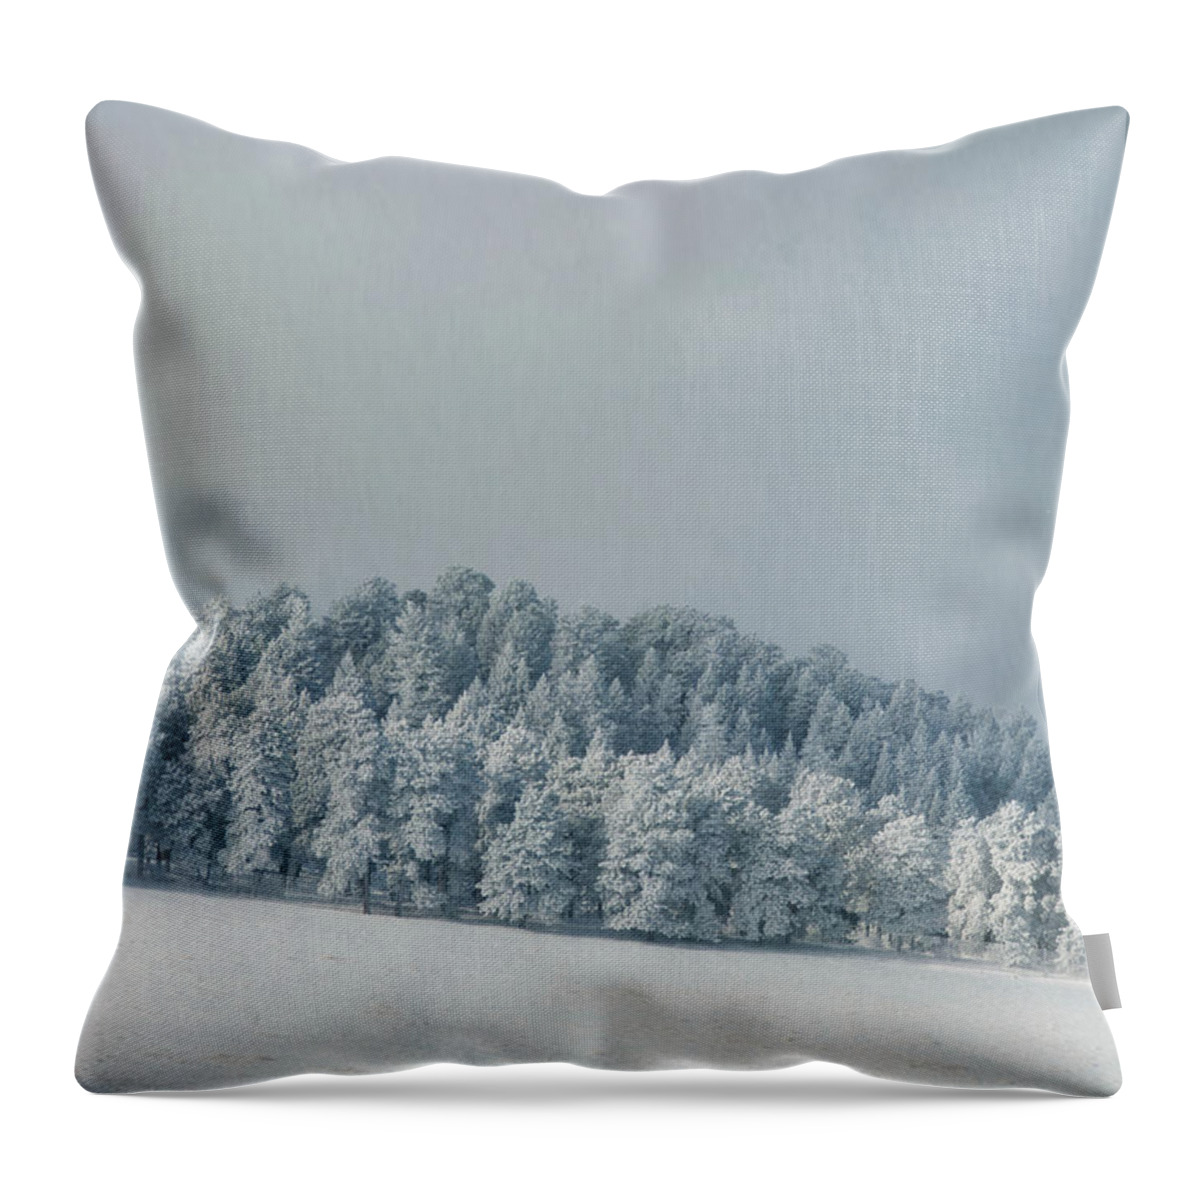 Snow Throw Pillow featuring the photograph Snowy Trees by Kevin Schwalbe